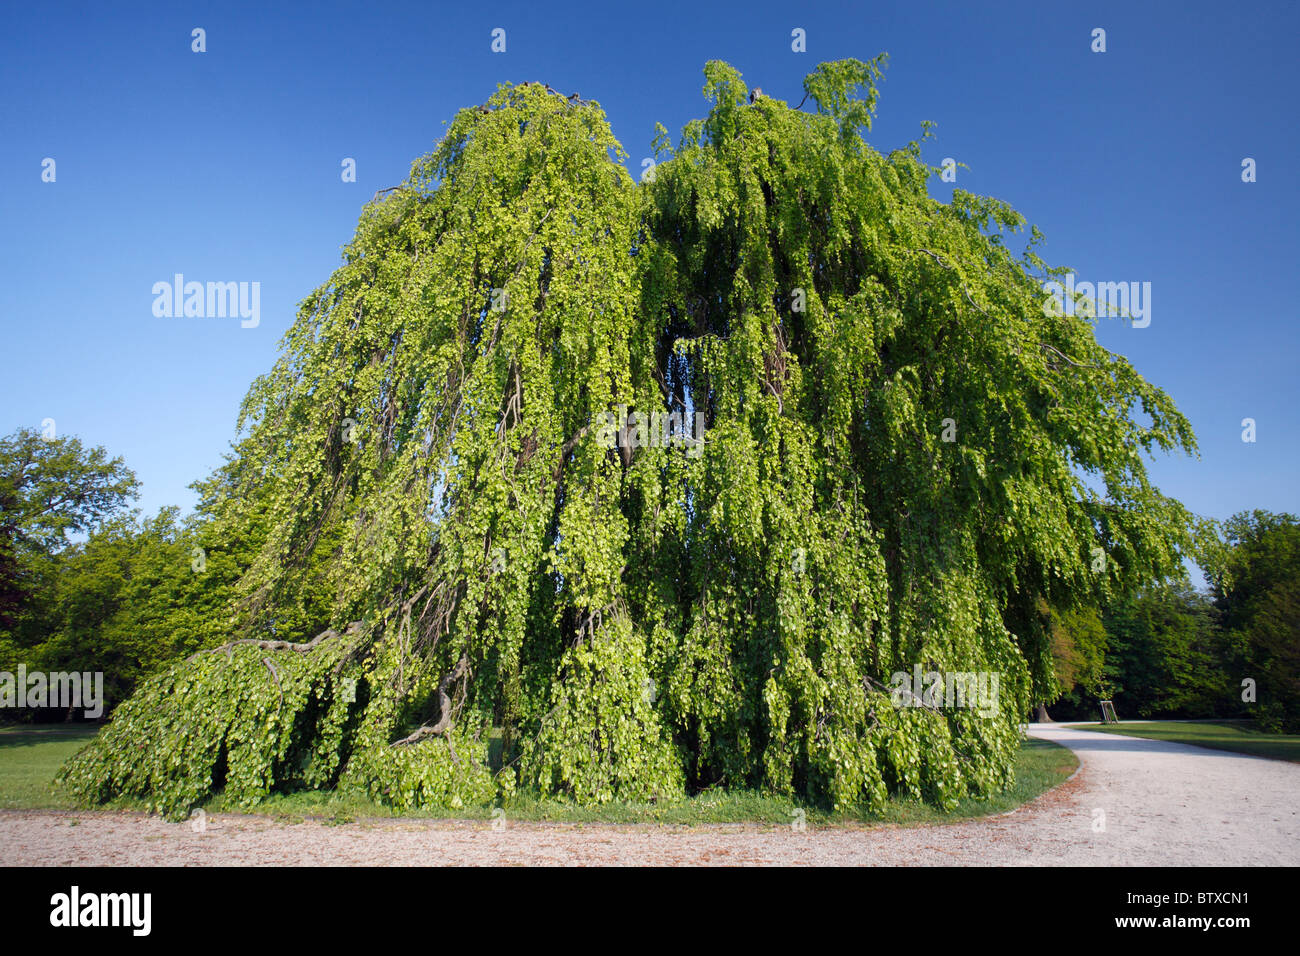 Beech Tree (Fagus sylvatica), weeping or pendula form, in park, Germany Stock Photo